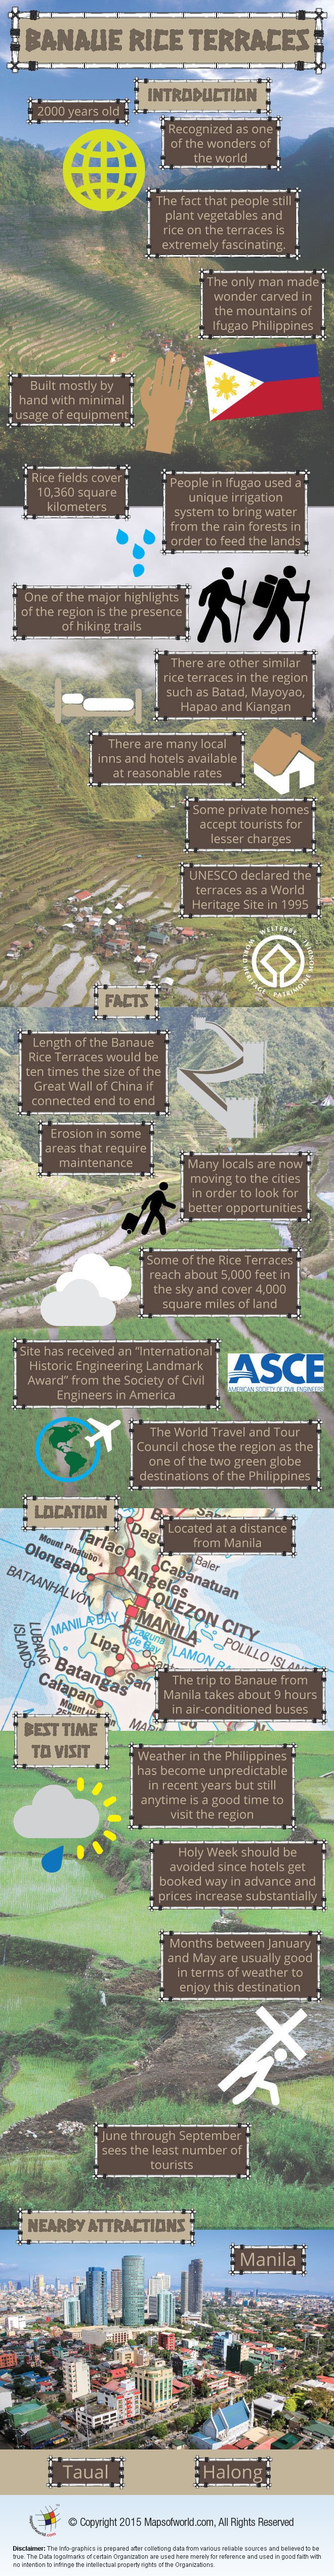 Banaue Rice Terraces - Facts & Infographic